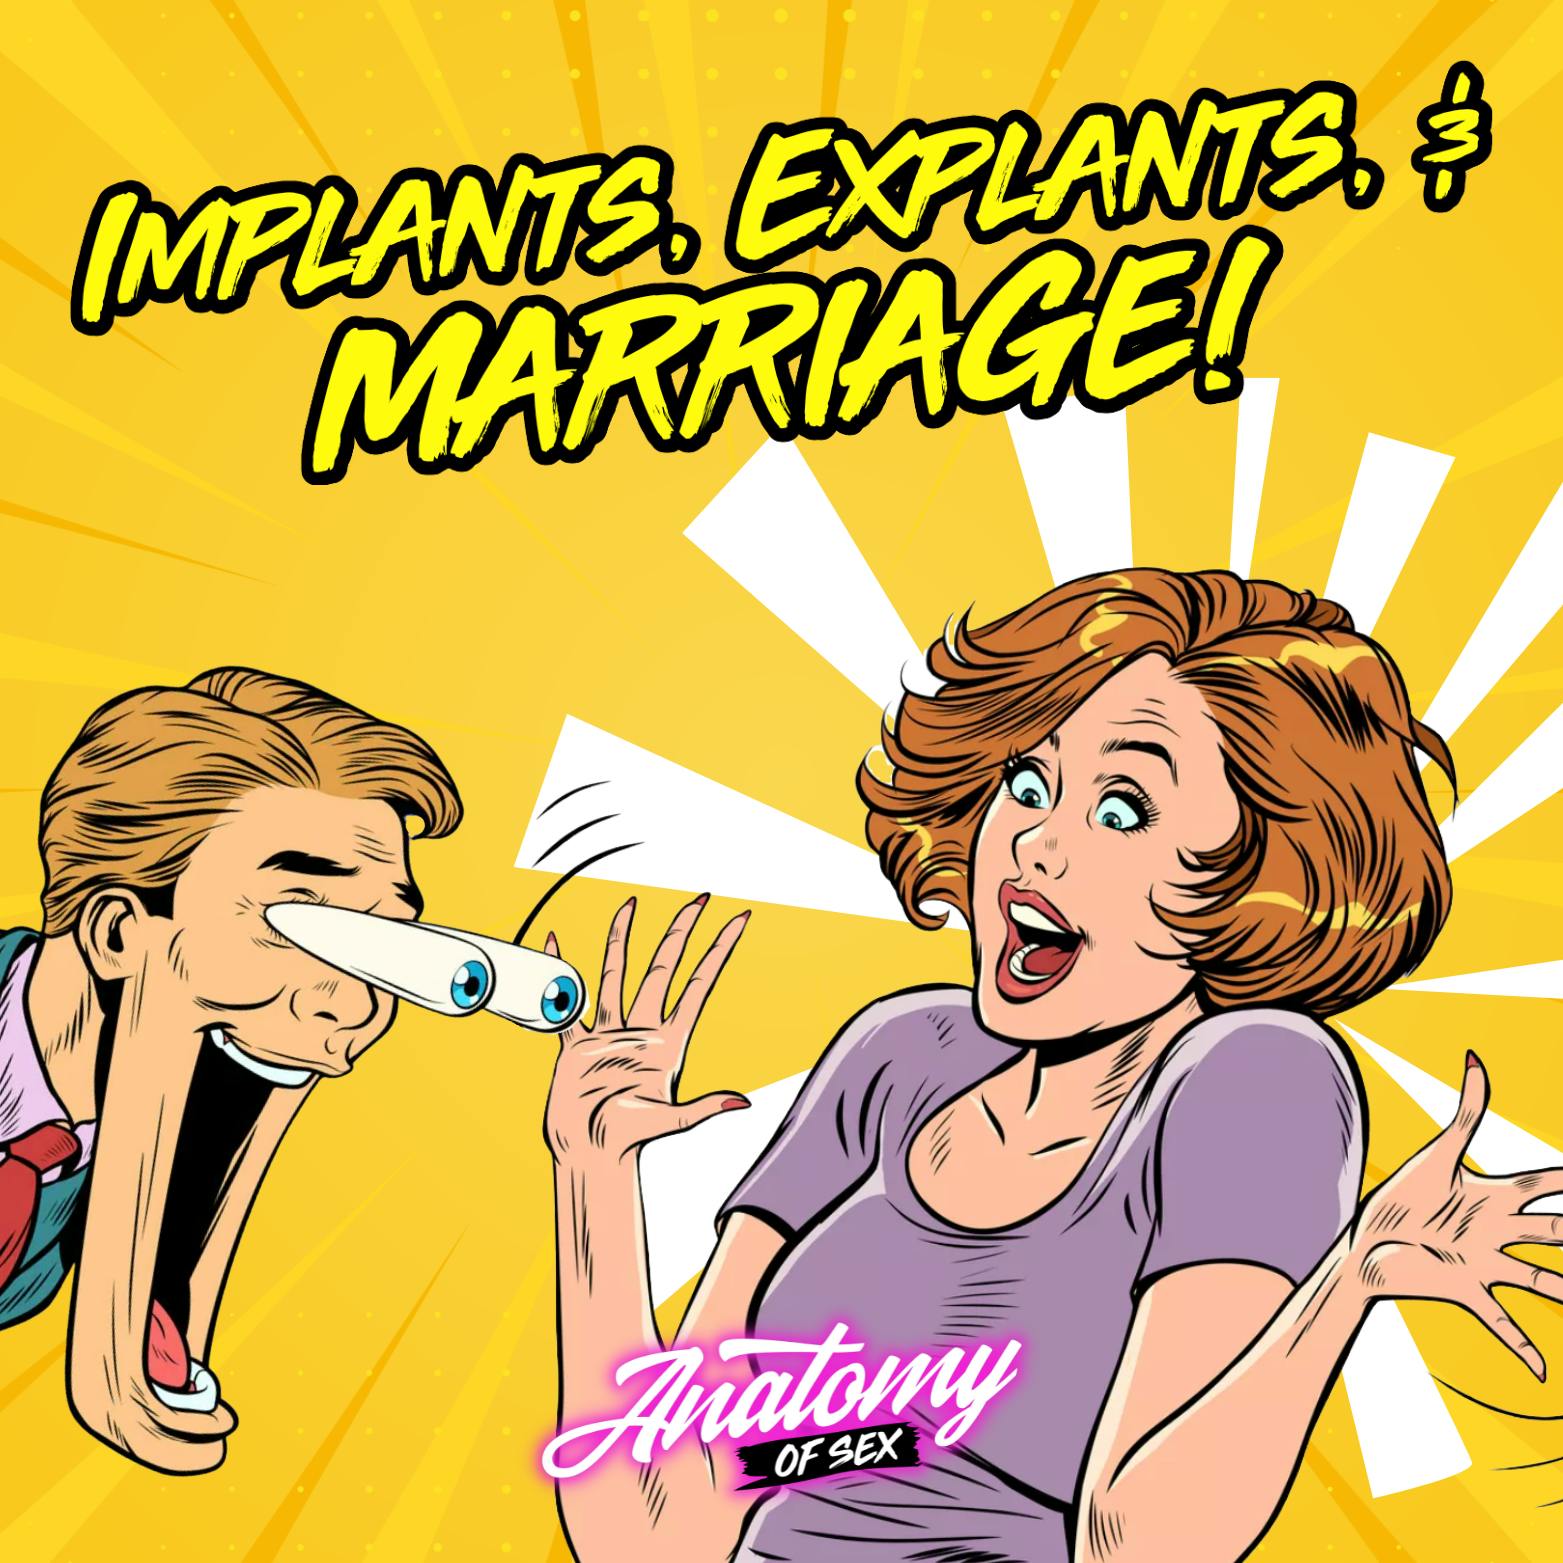 Implants, Explants, and Marriage